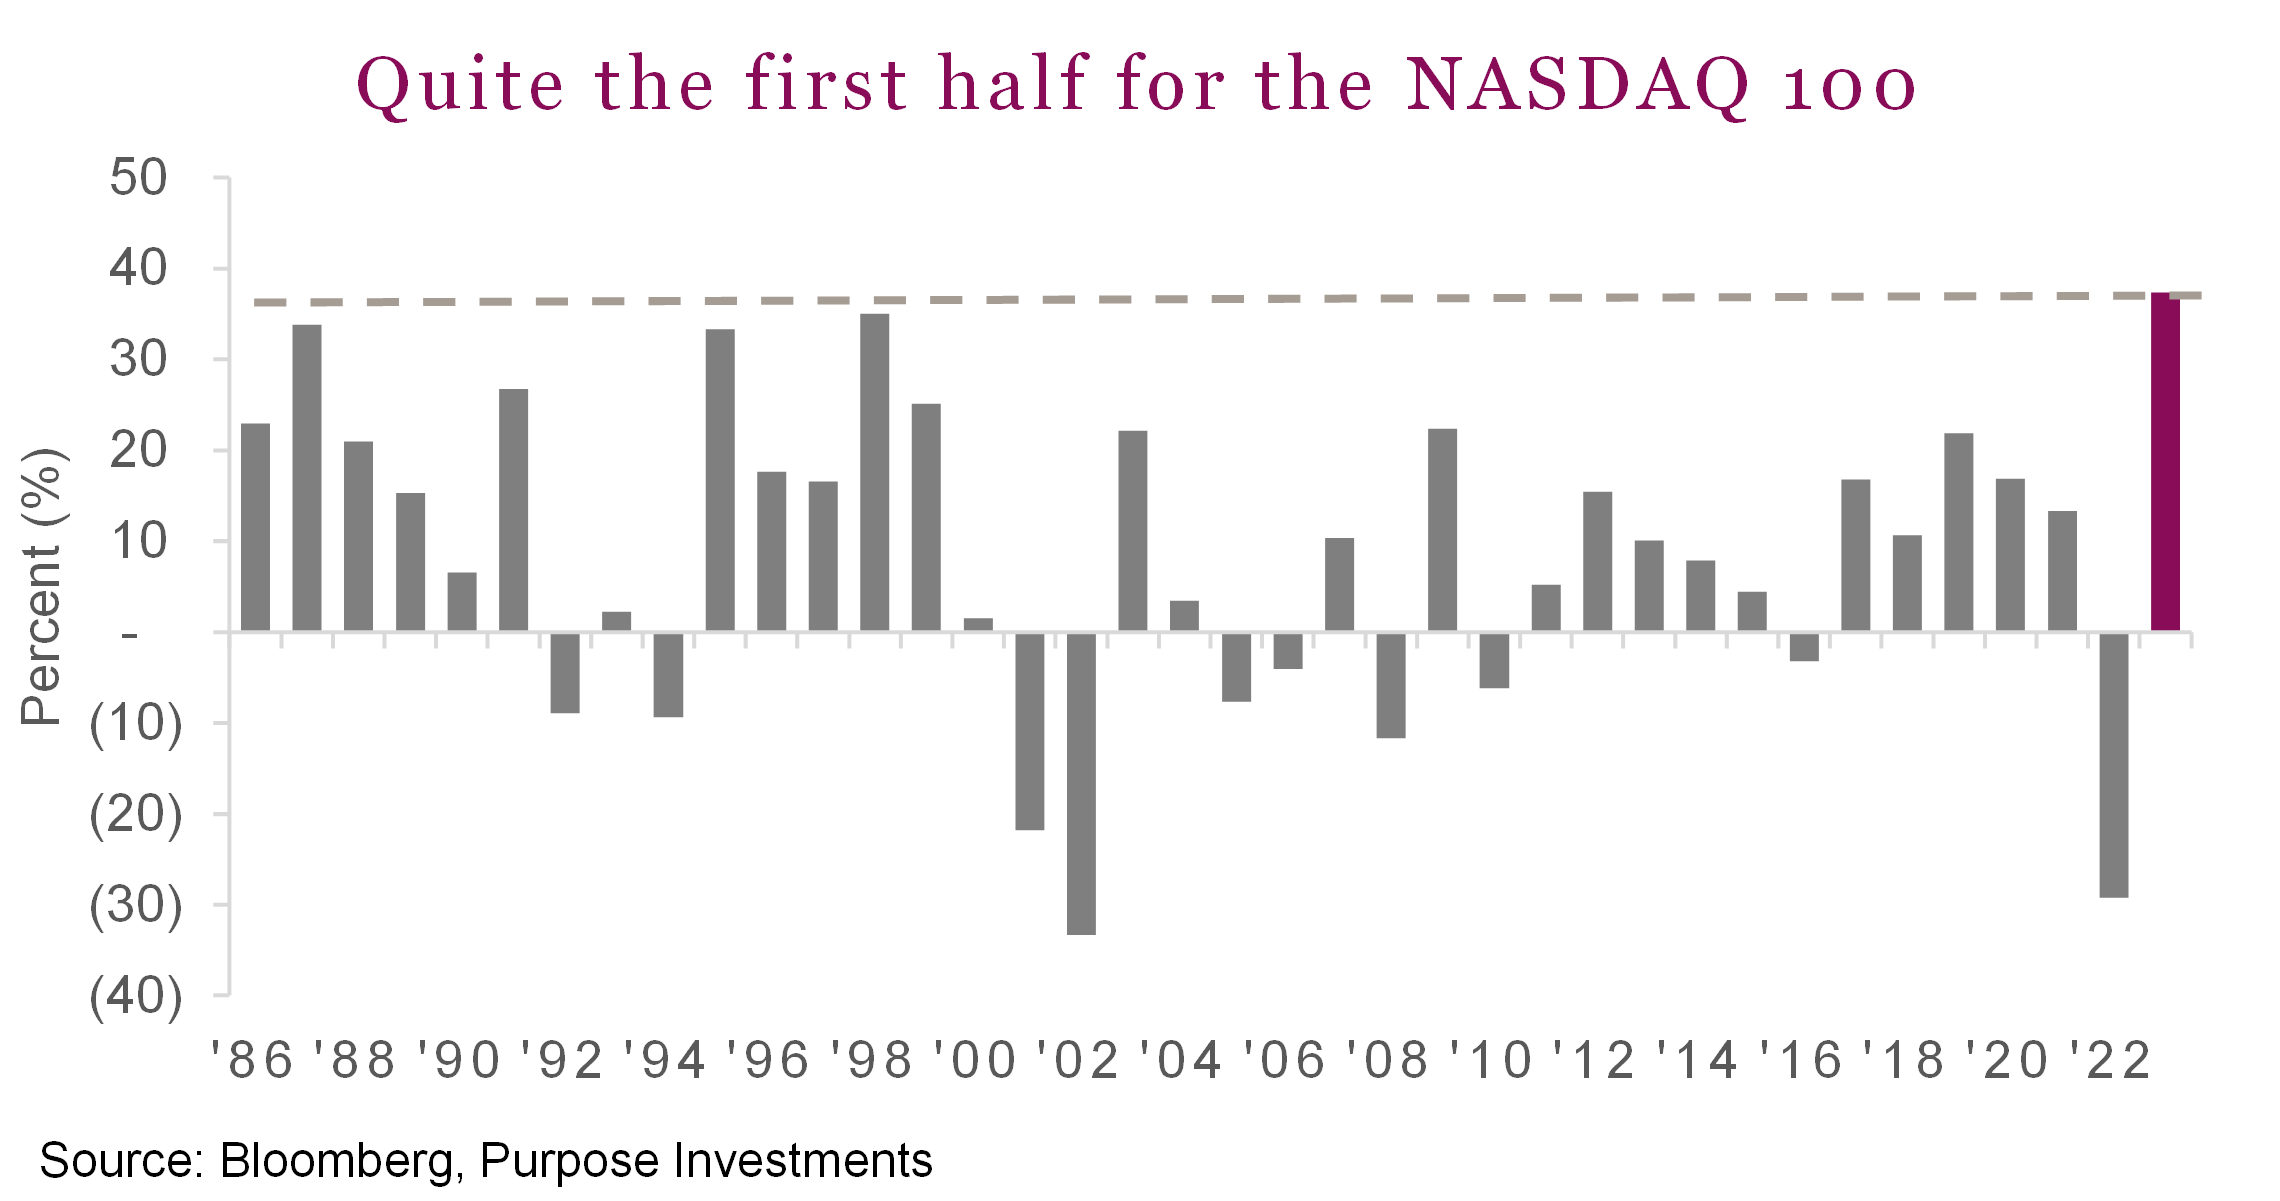 Quite the first half for the NASDAQ 100